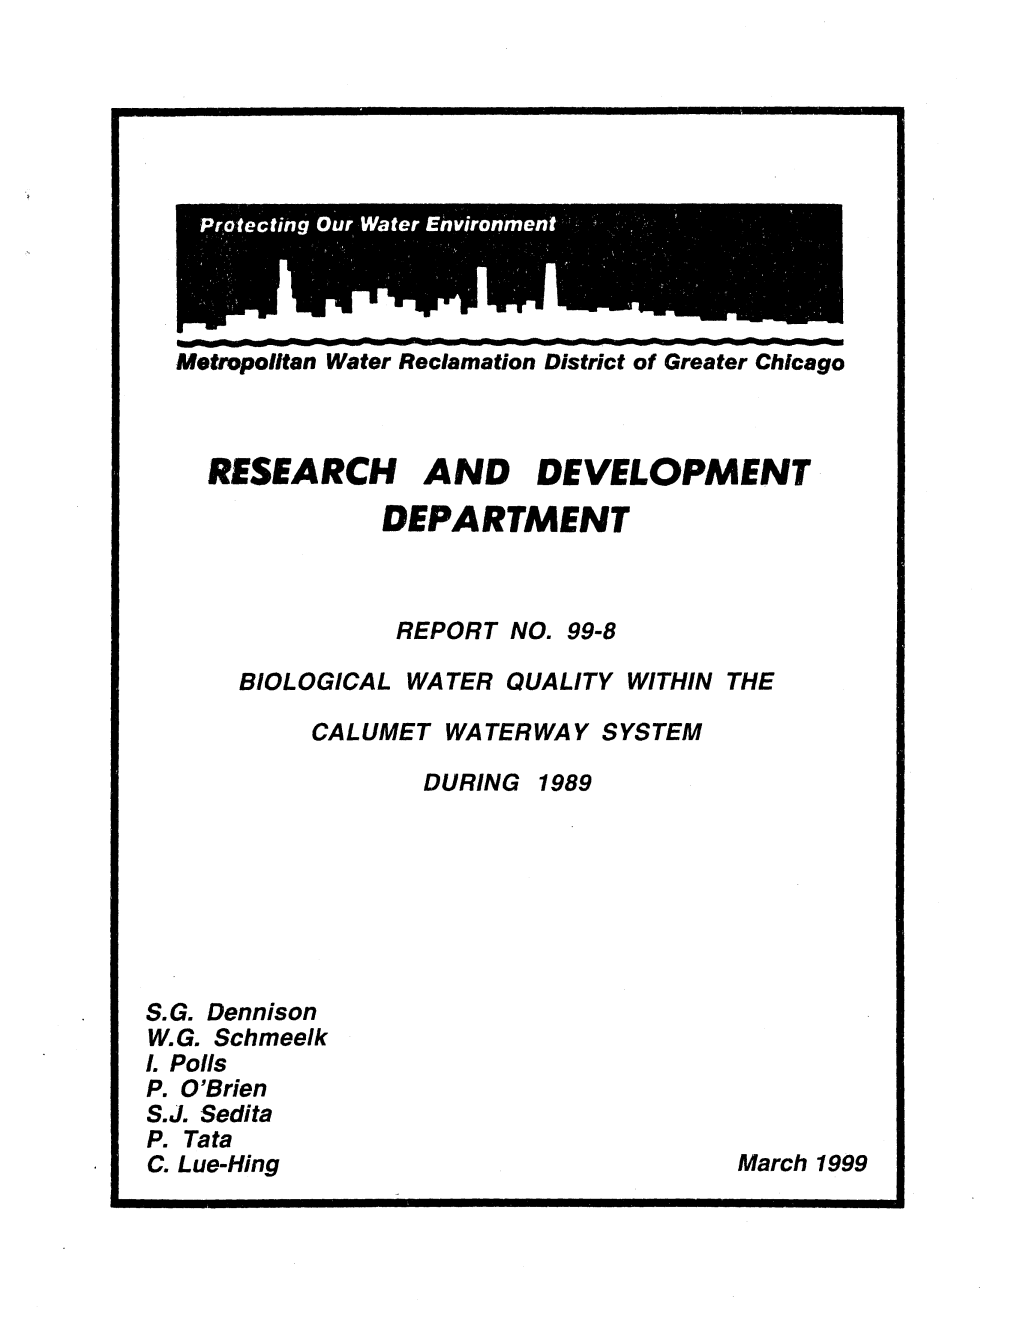 Biological Water Quality Within the Calumet Water System During 1989, MWRD, Report Number 99-8, March